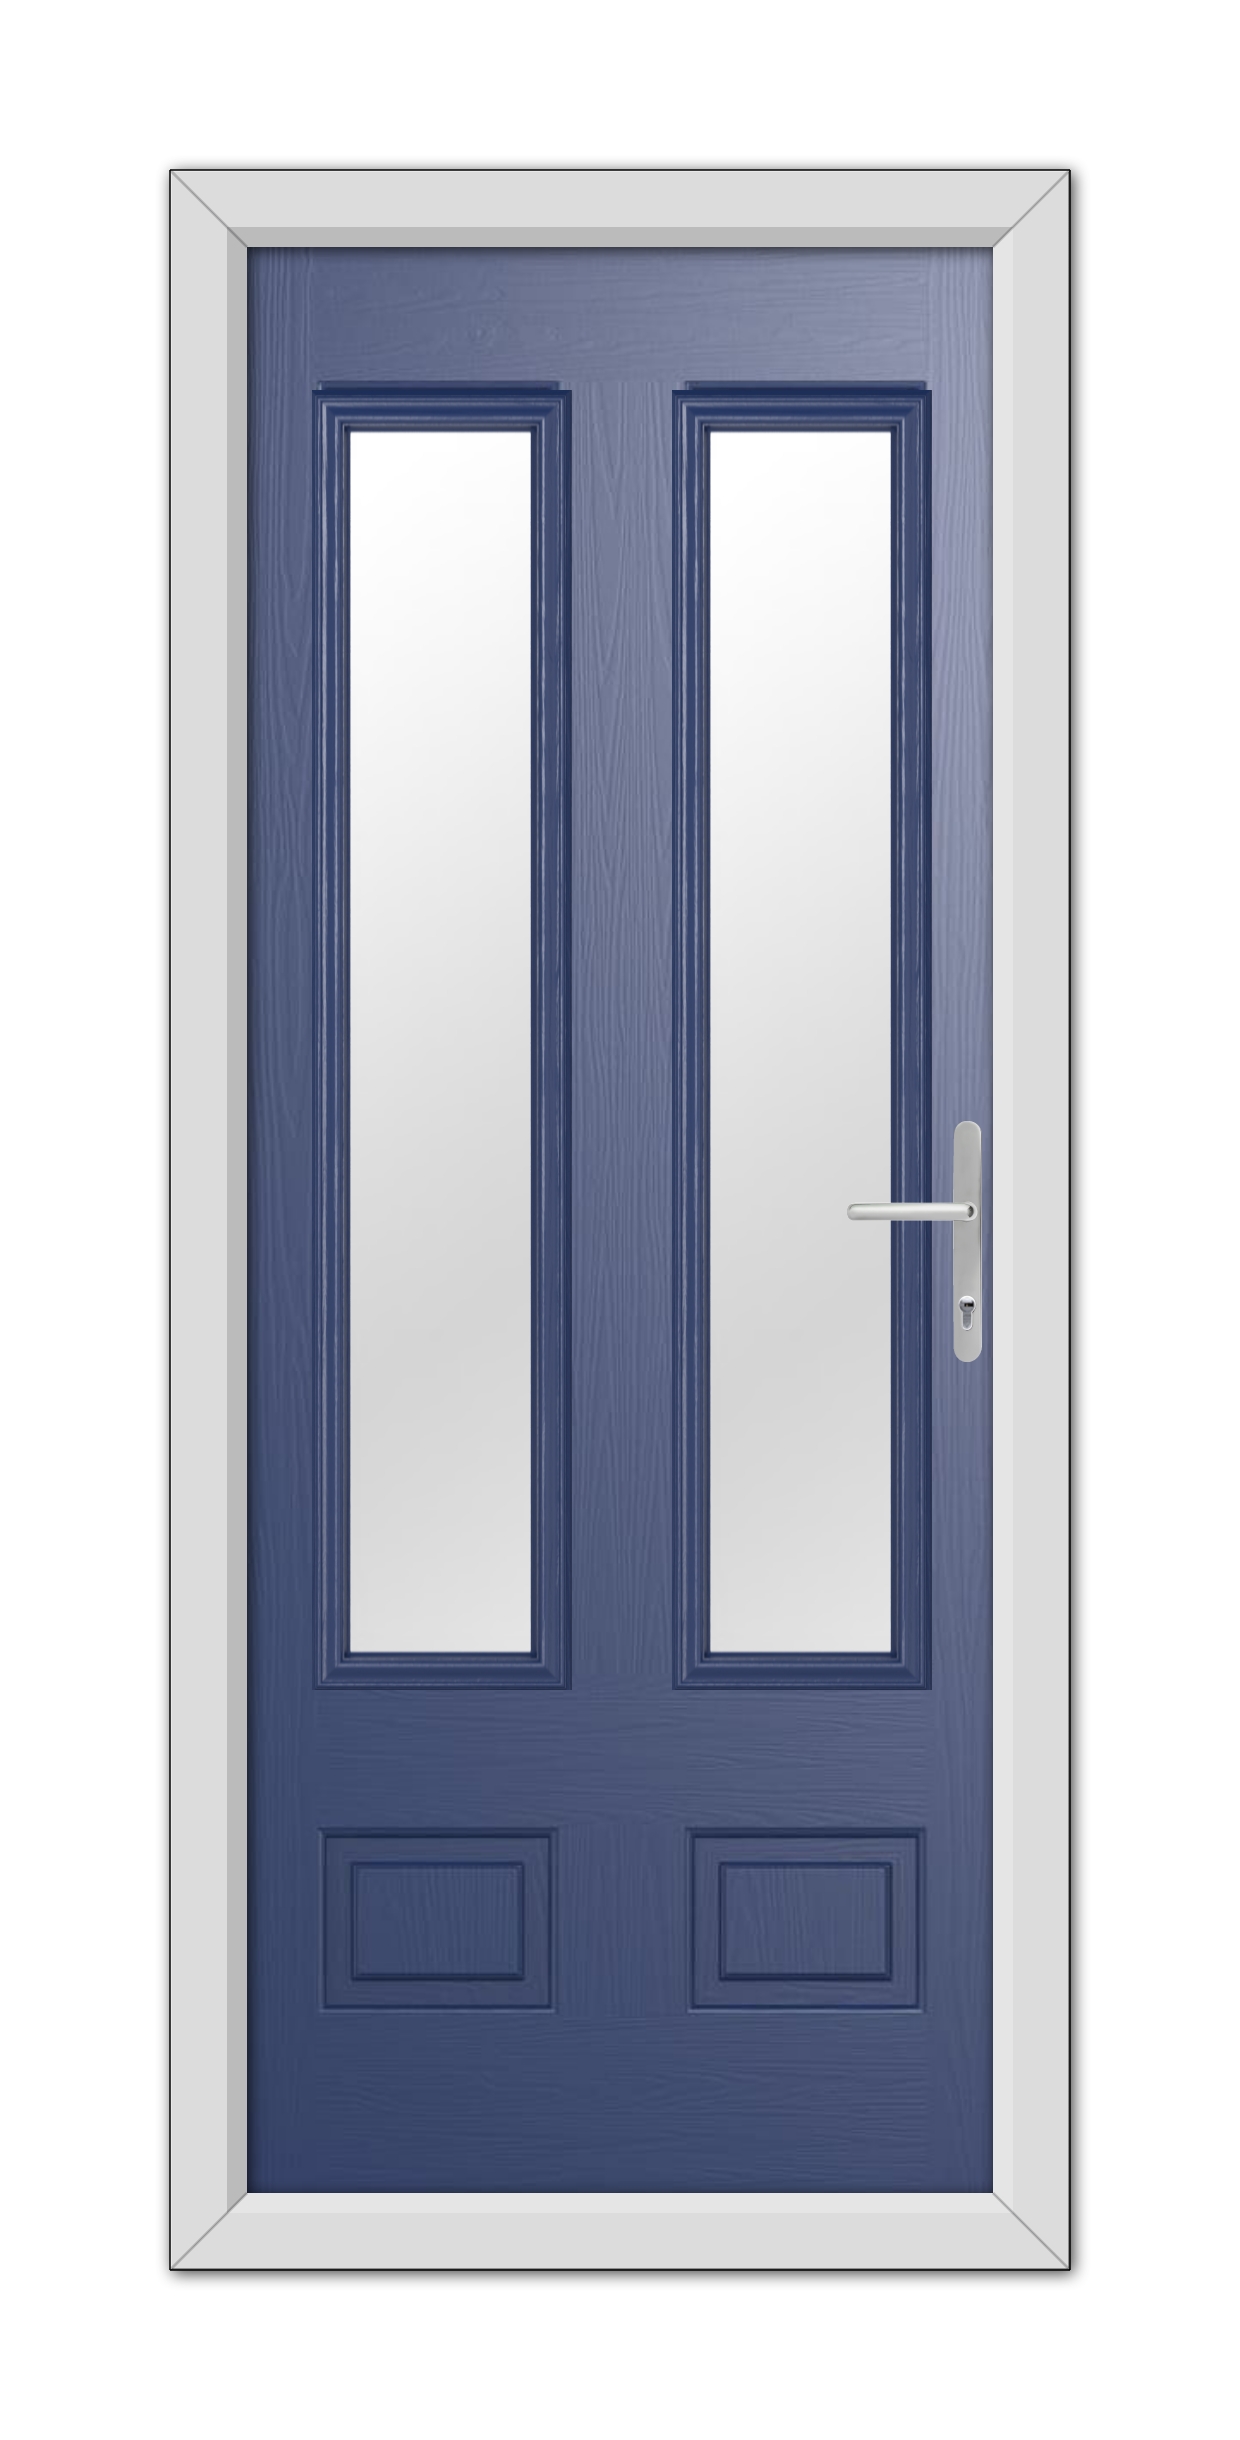 Blue Aston Glazed 2 Composite Door 48mm Timber Core with a blue finish and rectangular glass panes, featuring a silver handle on the right door.